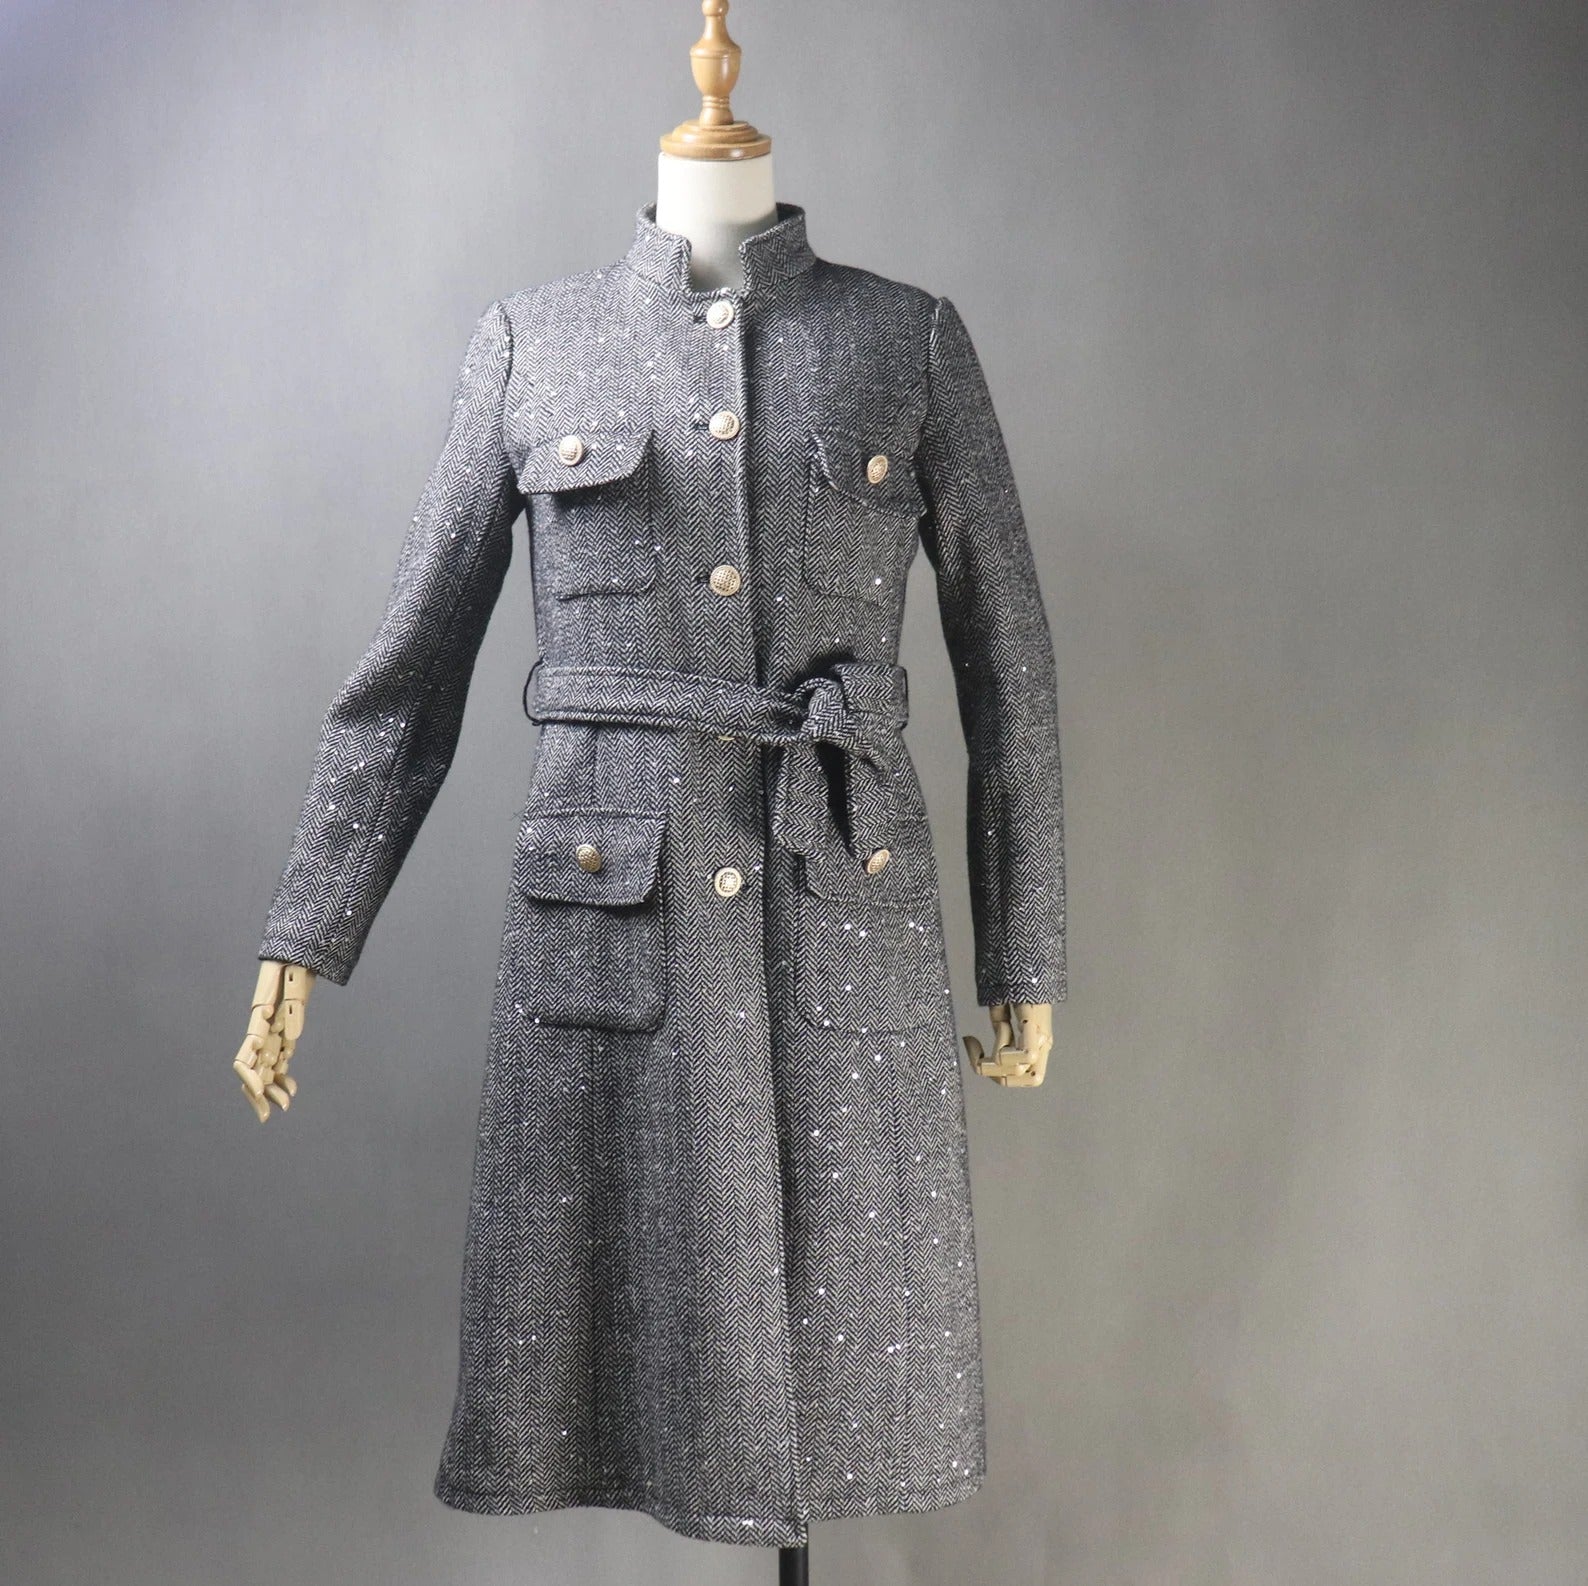 Women's Winter Tailor MADE Sequinned Tweed Belted Long Warm Trench Coat Grey  UK CUSTOMER SERVICE!  Women's Winter Tailor MADE Sequinned Tweed Belted Long Warm Trench Coat Grey- Grey warm coat can wear for Winter season and Autumn season. Feel comfort and elegant.  Sequinned Style Long Sleeves Long belt Front pocket Pearl Button Collar type Neck